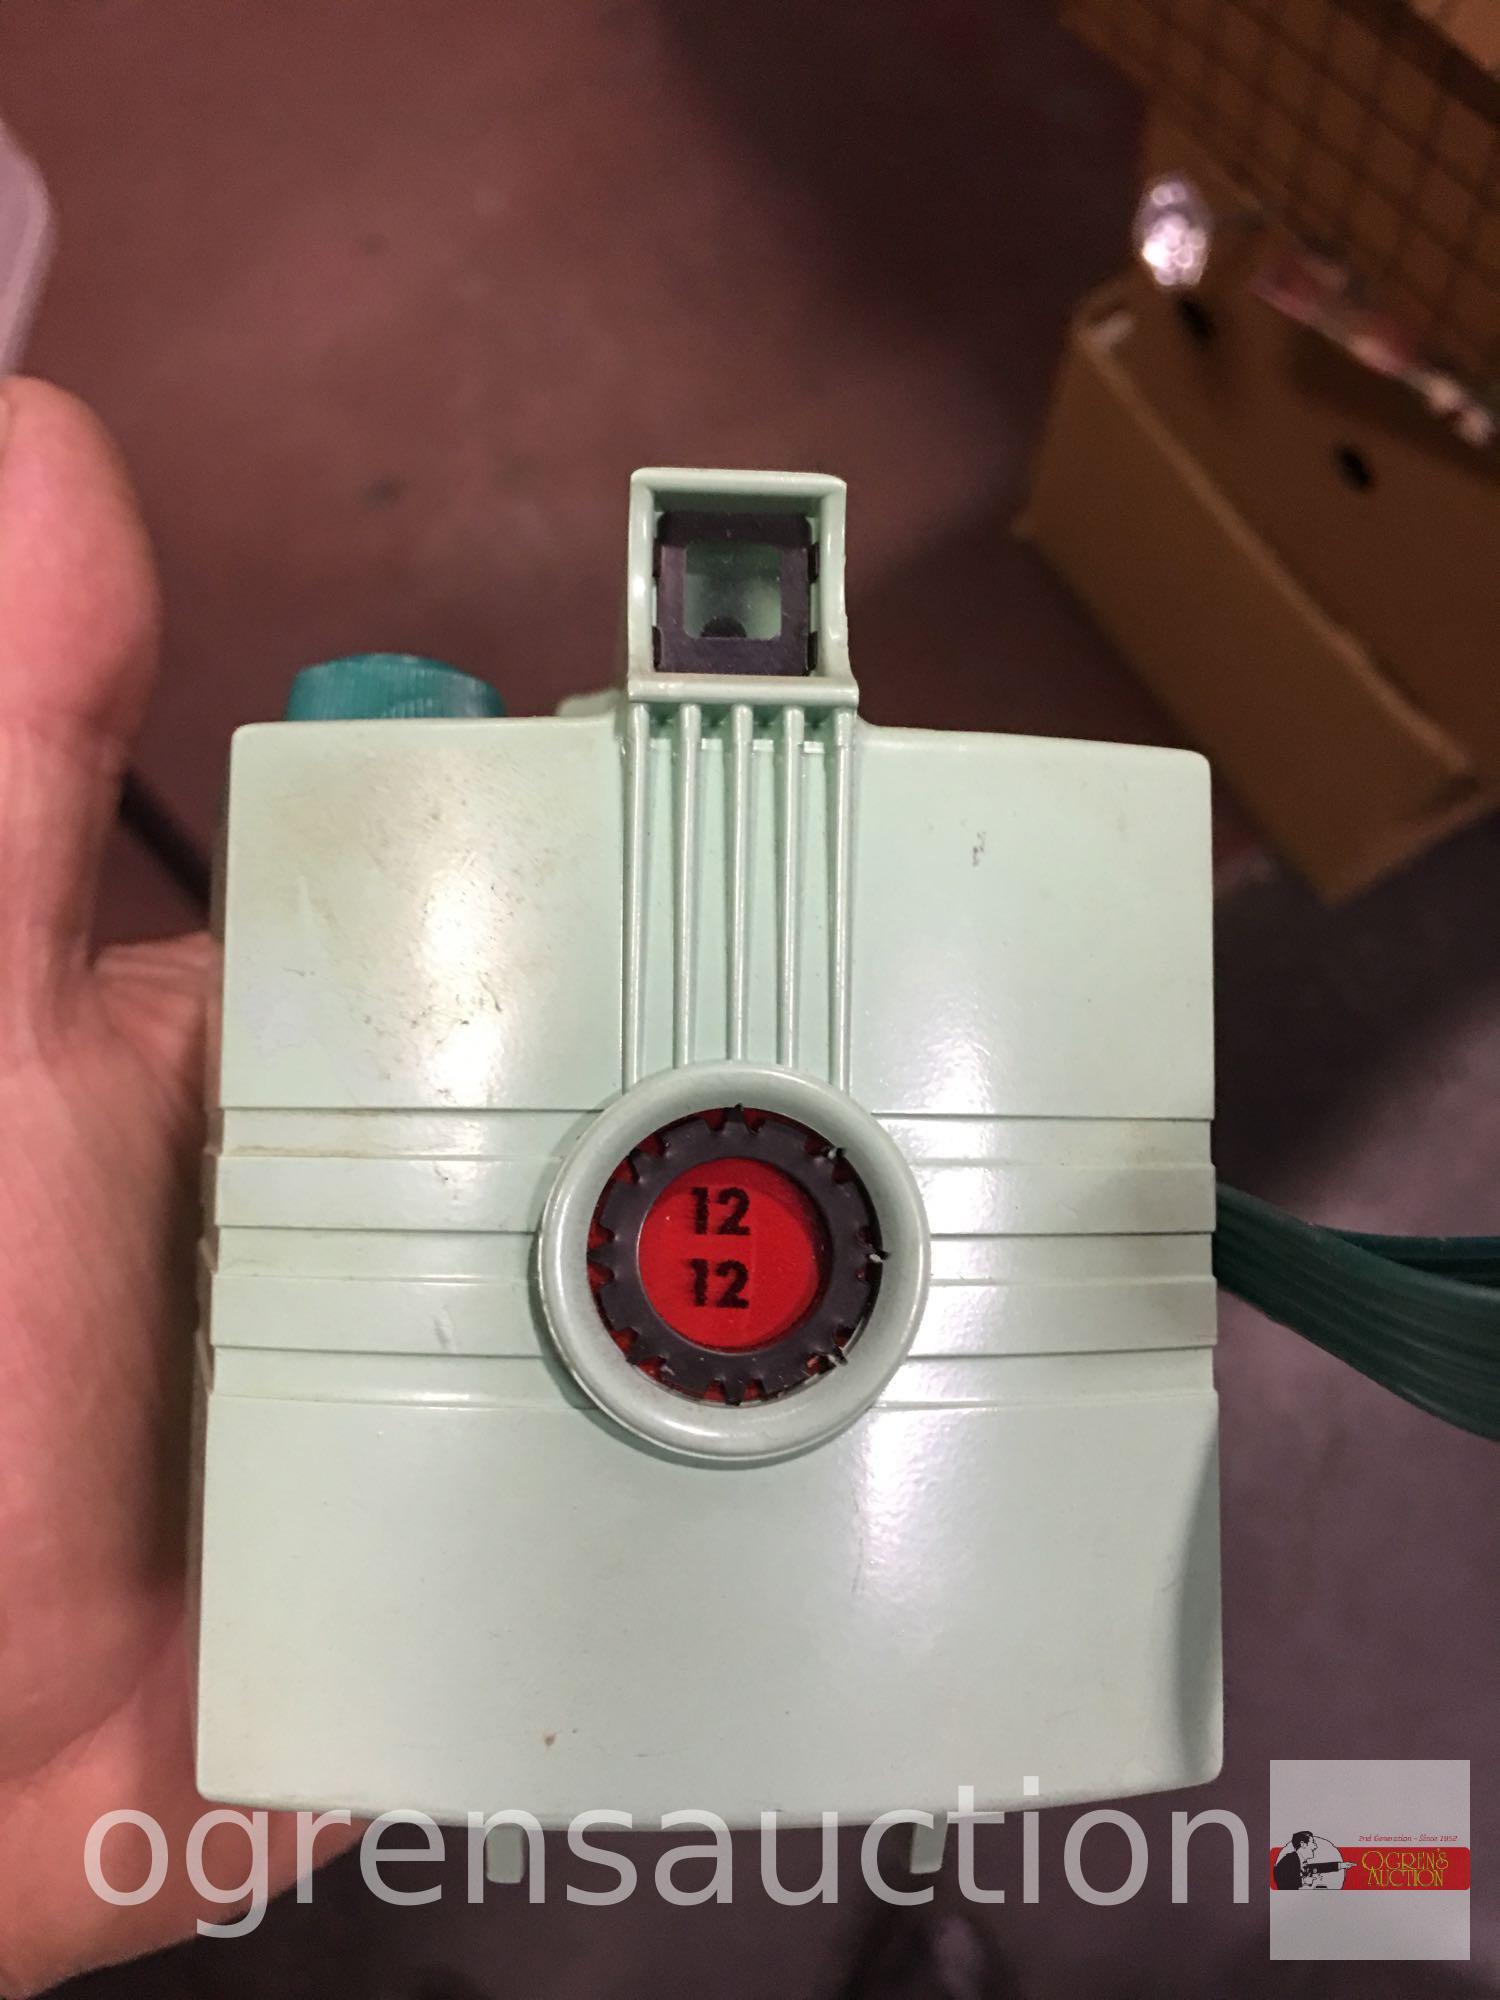 Girl Scouts - Vintage official Girl Scout Camera